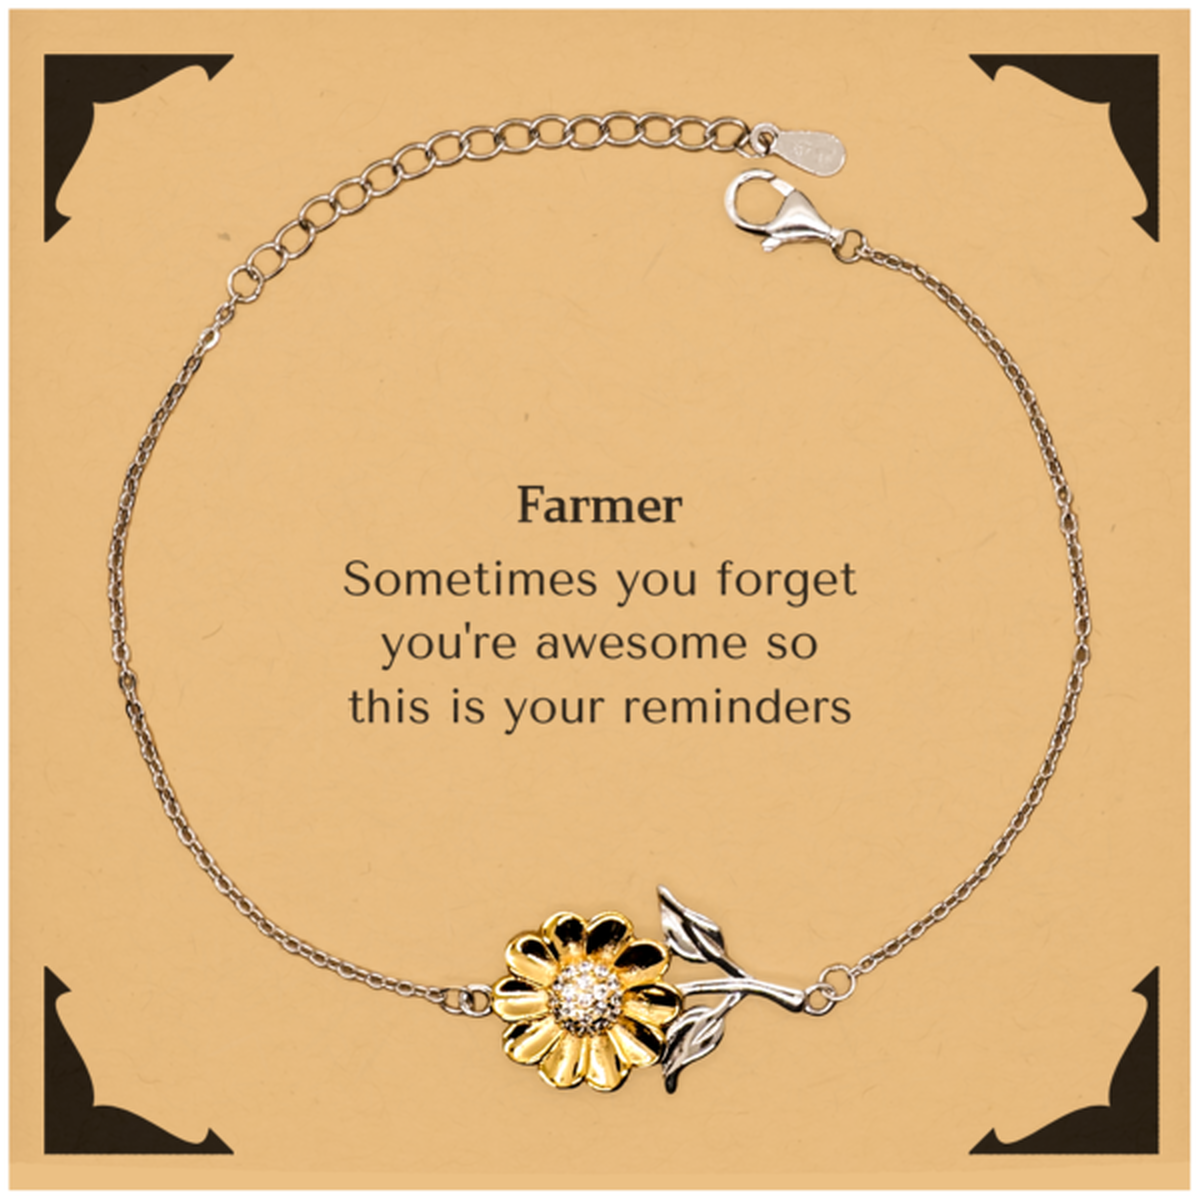 Sentimental Farmer Sunflower Bracelet, Farmer Sometimes you forget you're awesome so this is your reminders, Graduation Christmas Birthday Gifts for Farmer, Men, Women, Coworkers